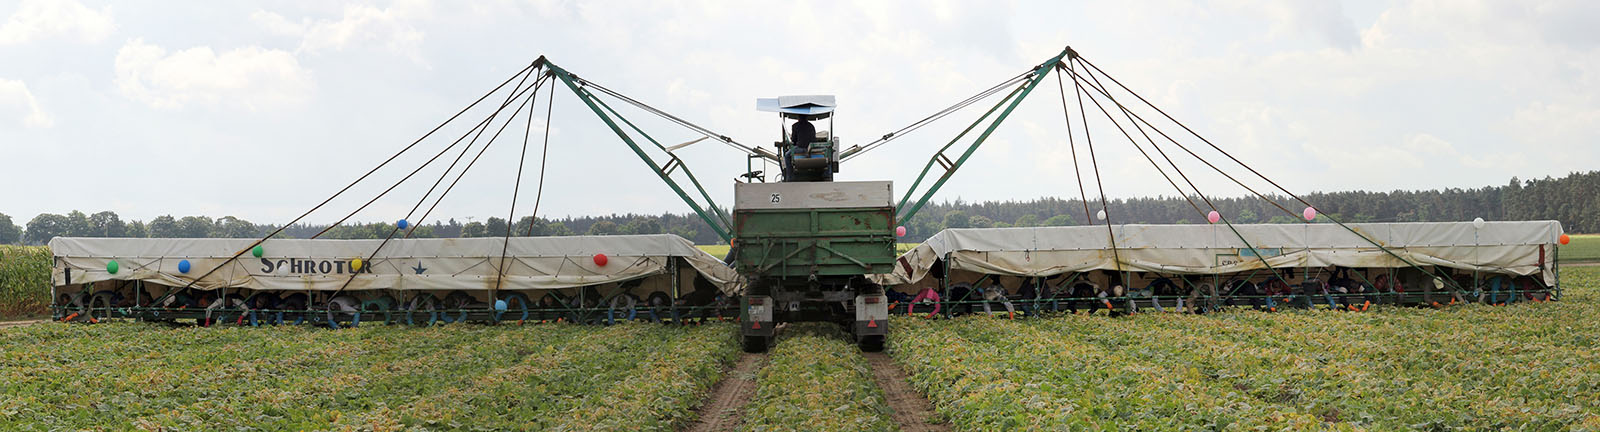 Agricultural vehicles known as “cucumber flyers” enable as many as 50 seasonal workers to